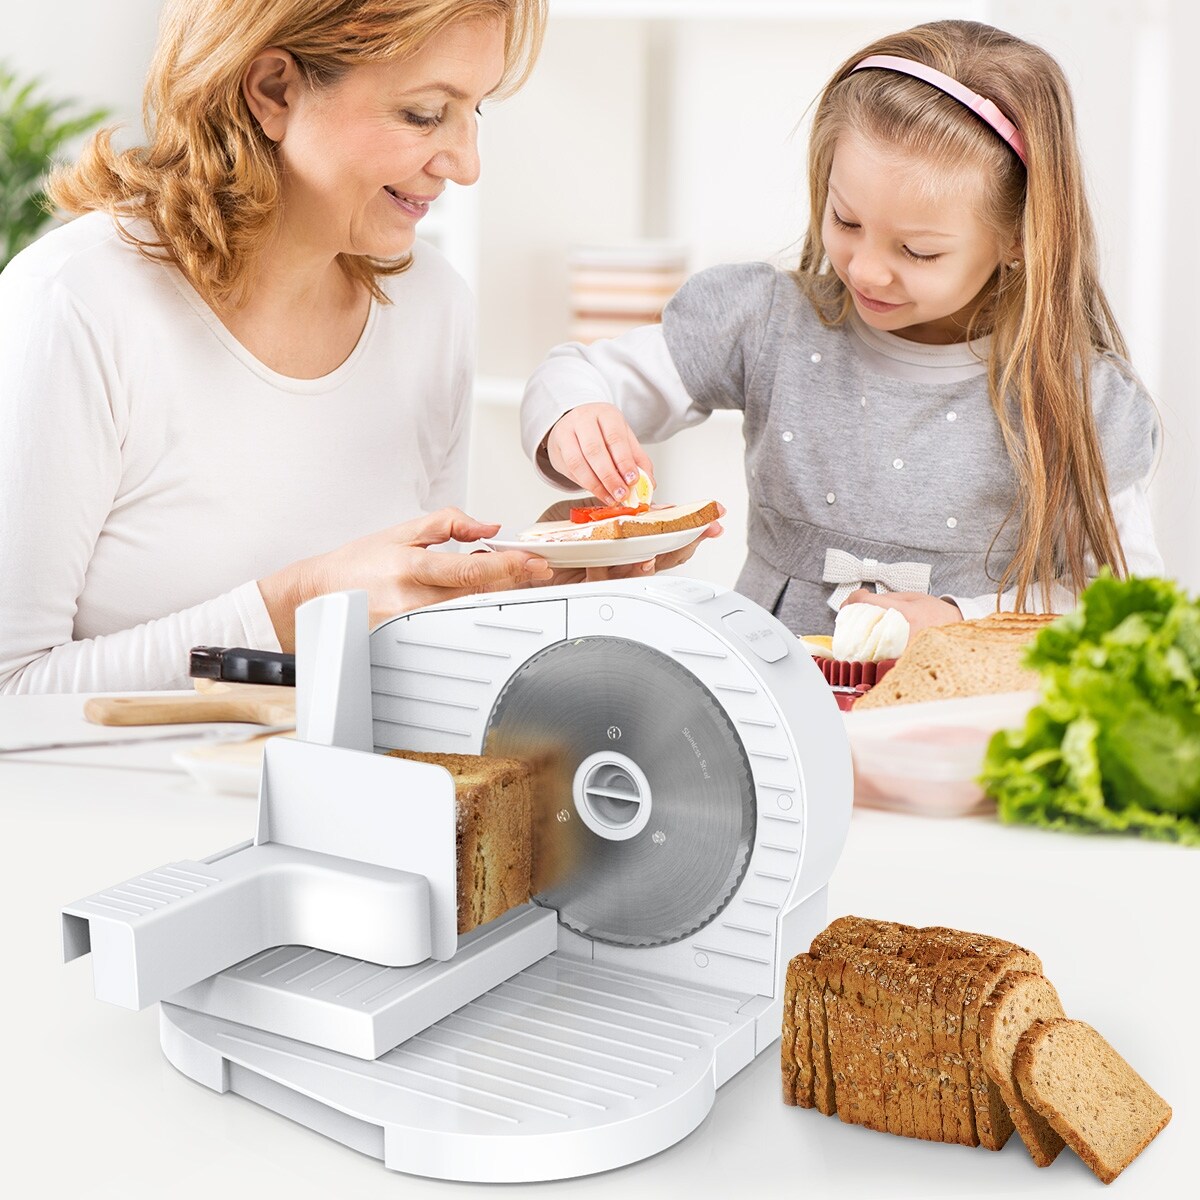 Mliter Electric Food Slicer Precision 7.5-Inch Stainless Steel Blade For  Bread and Meat, 150 Watt - Bed Bath & Beyond - 28716825